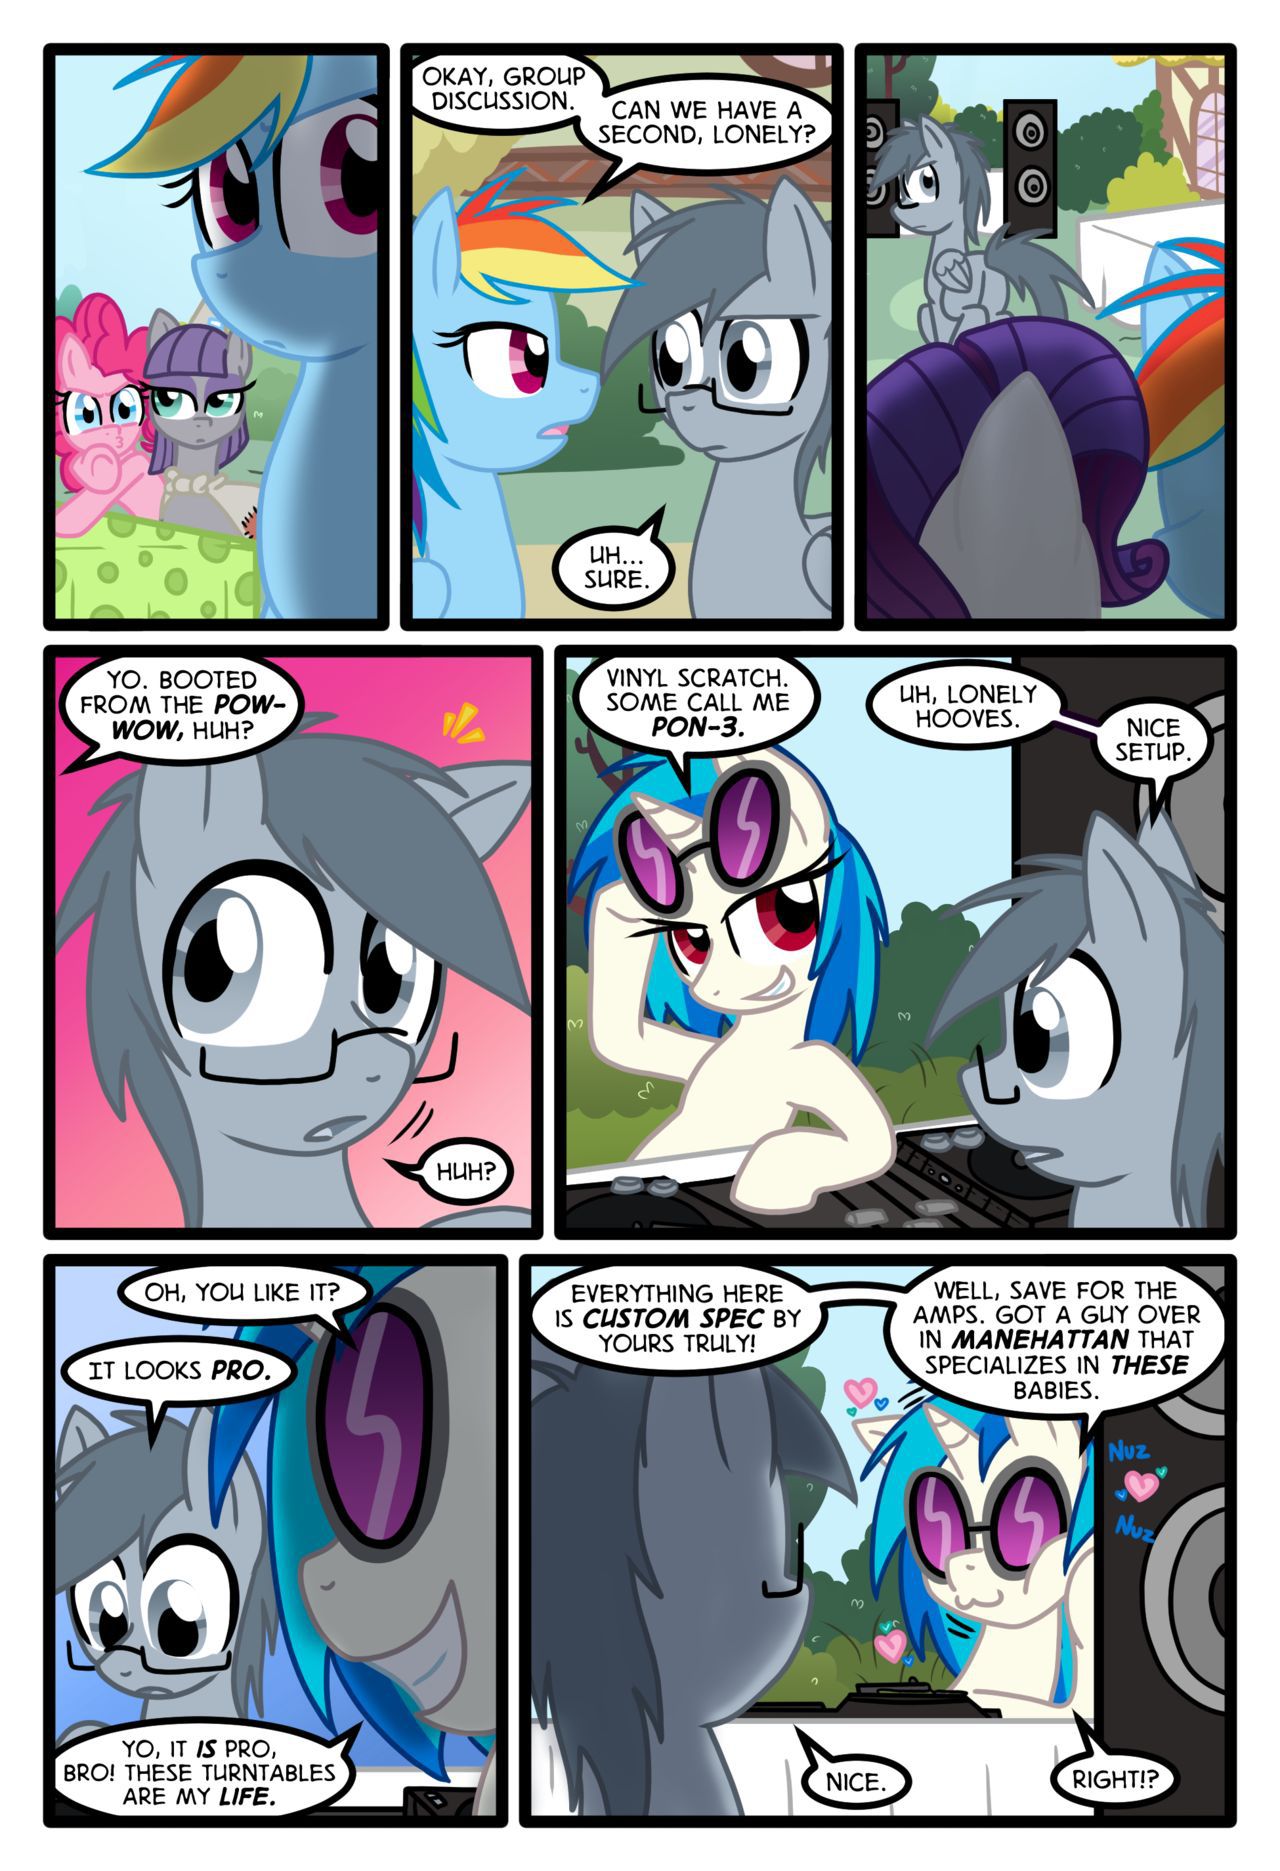 [Zaron] Lonely Hooves (My Little Pony Friendship Is Magic) [Ongoing] 53